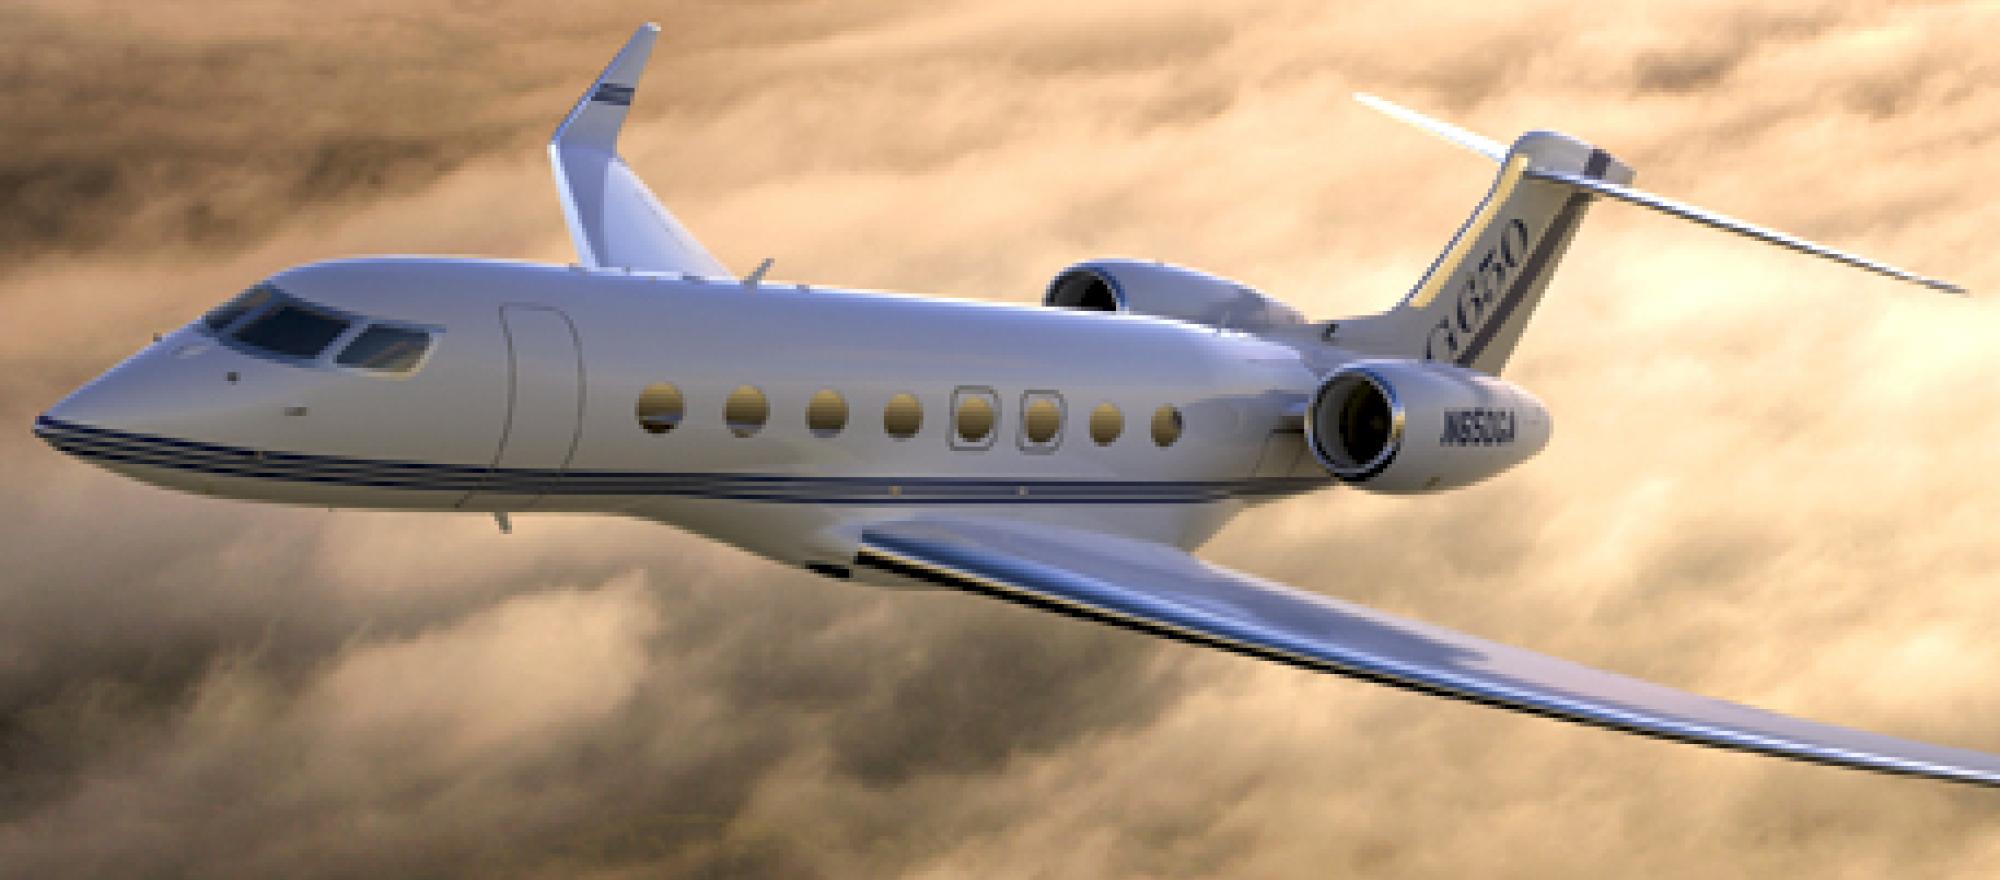 The clean-sheet G650, shown here in an artist’s rendering, Still looks every 